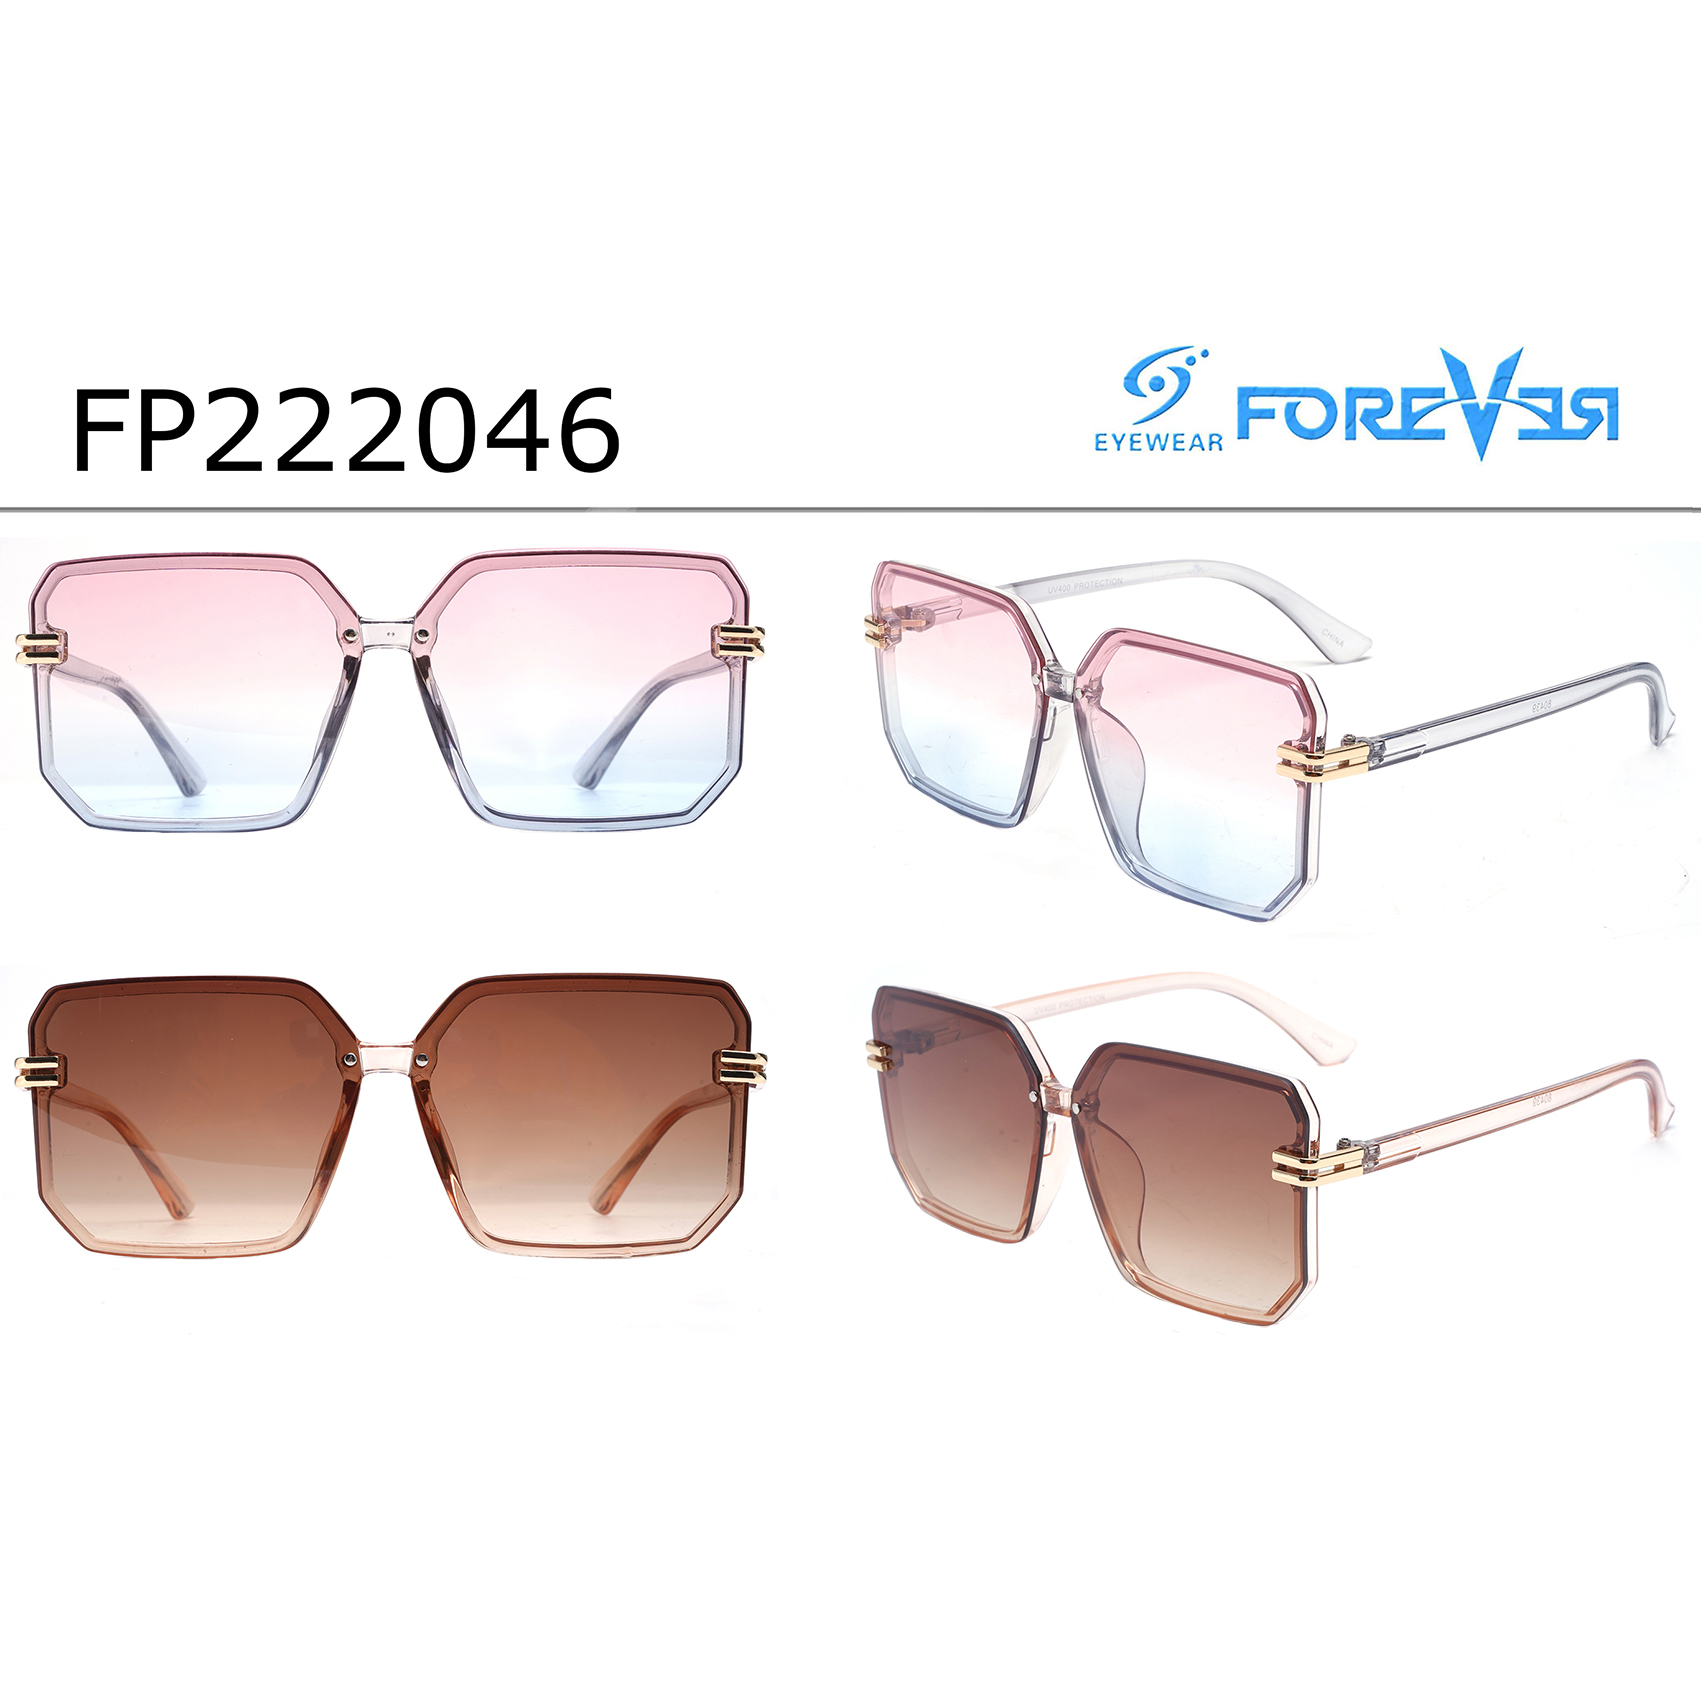 Gradient Large Square Frame Sunglasses Sunglass Manufacturing Companies